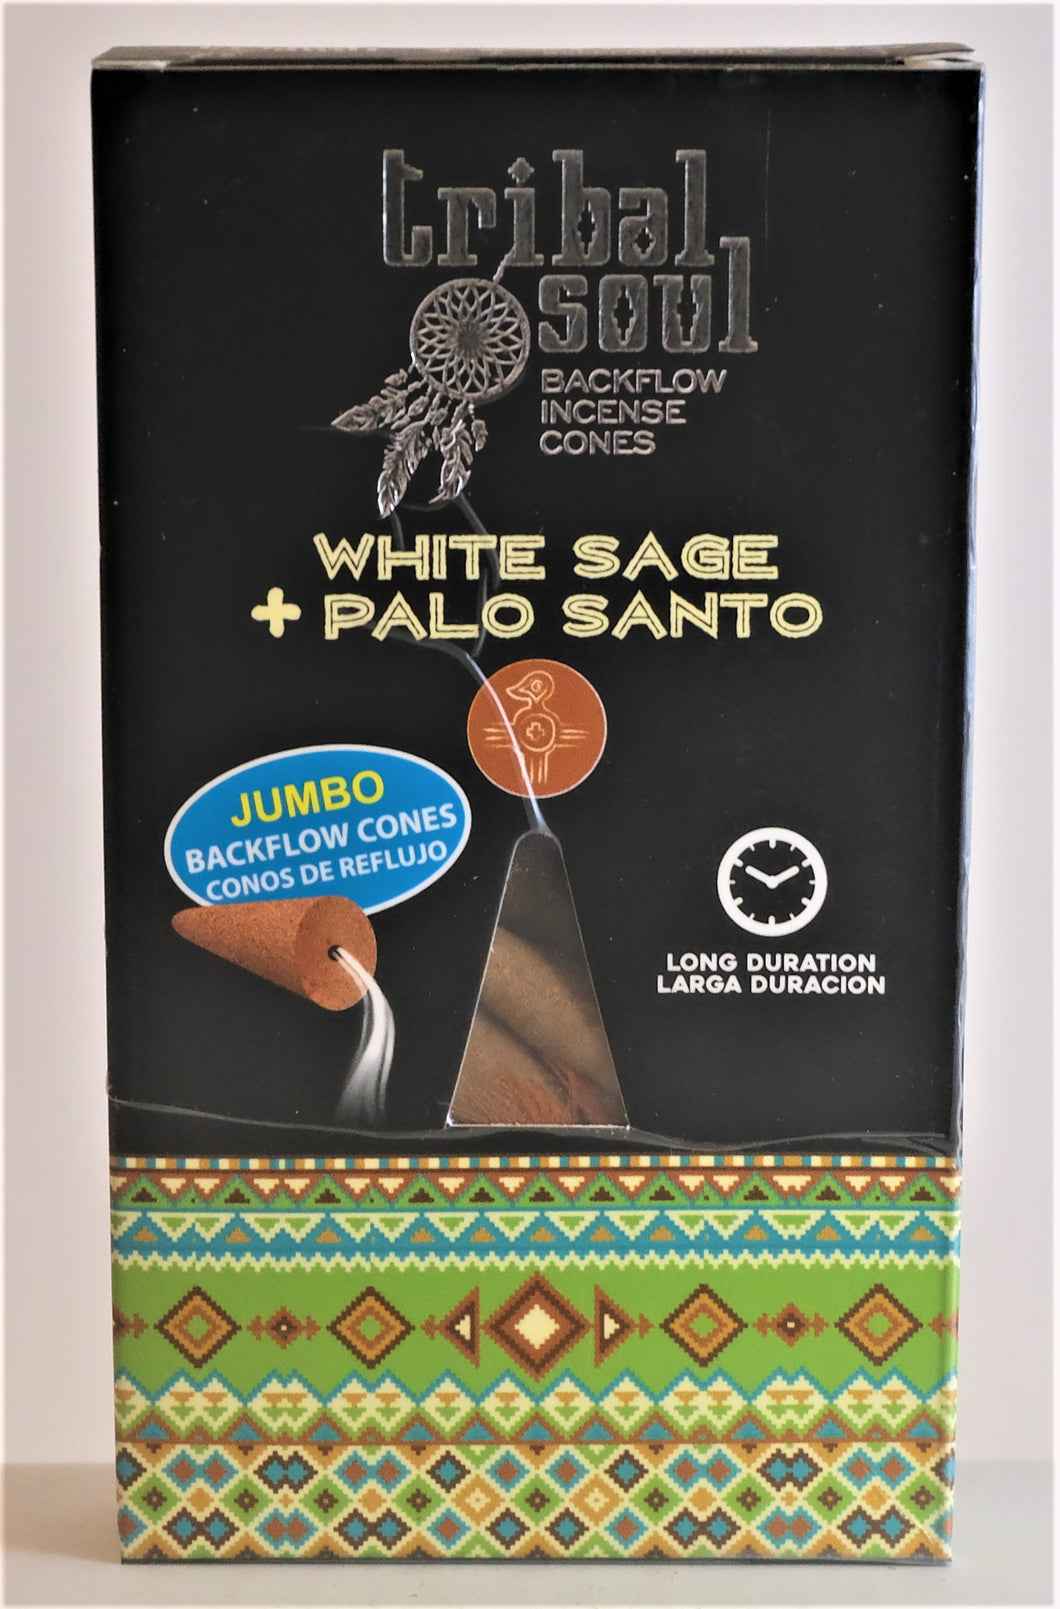 Tribal Soul Backflow Incense Cones - White Sage and Palo Santo